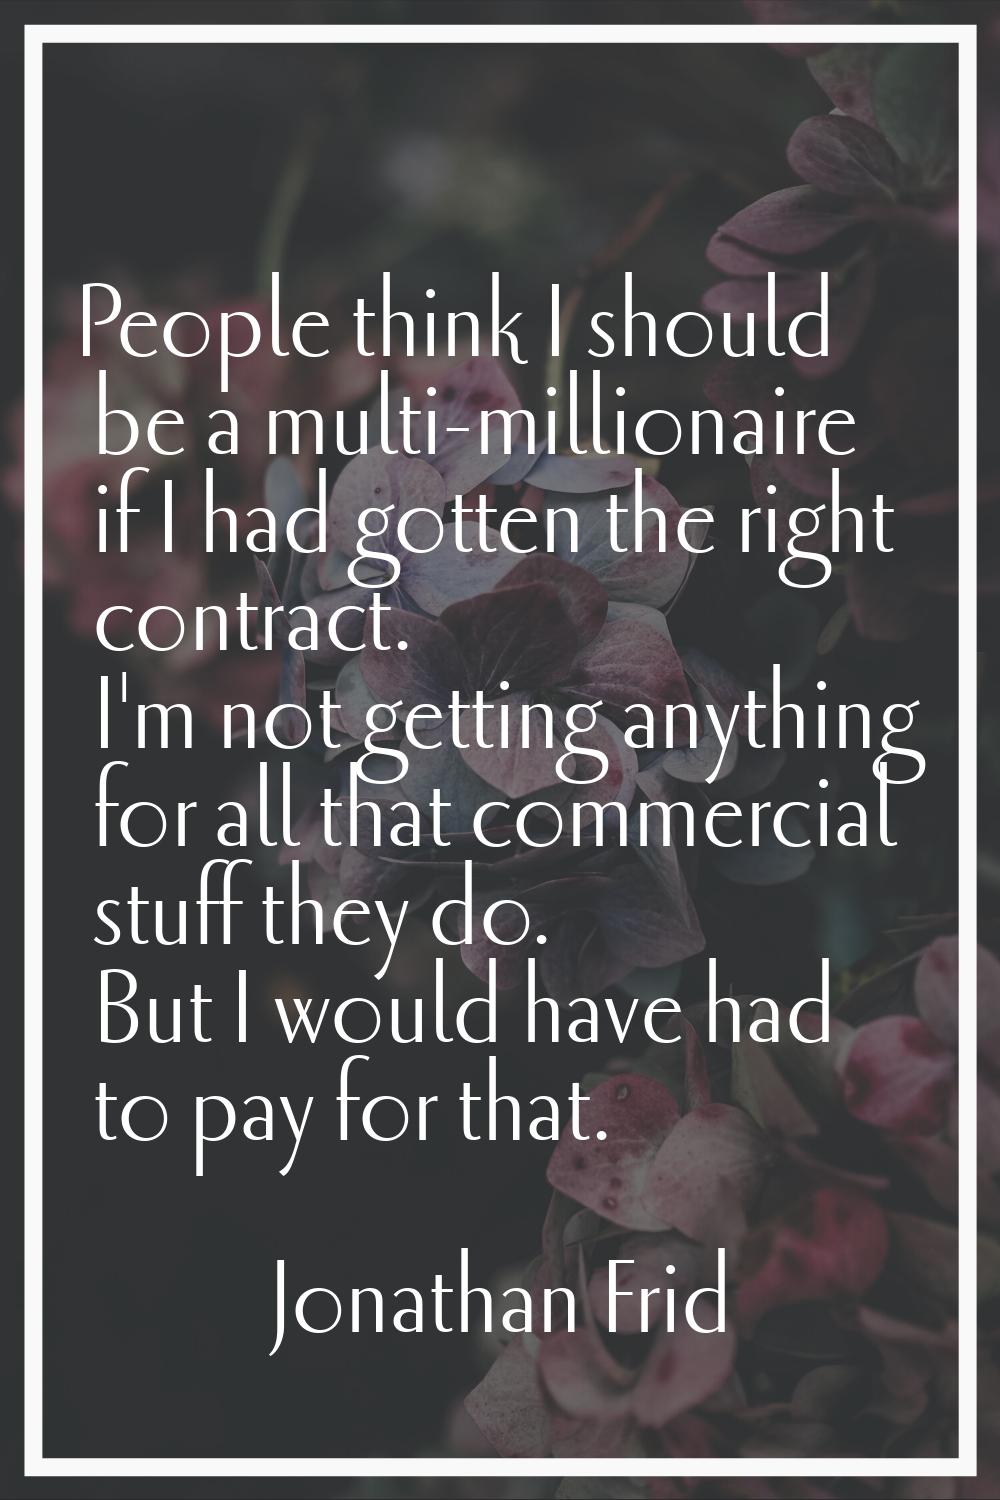 People think I should be a multi-millionaire if I had gotten the right contract. I'm not getting an